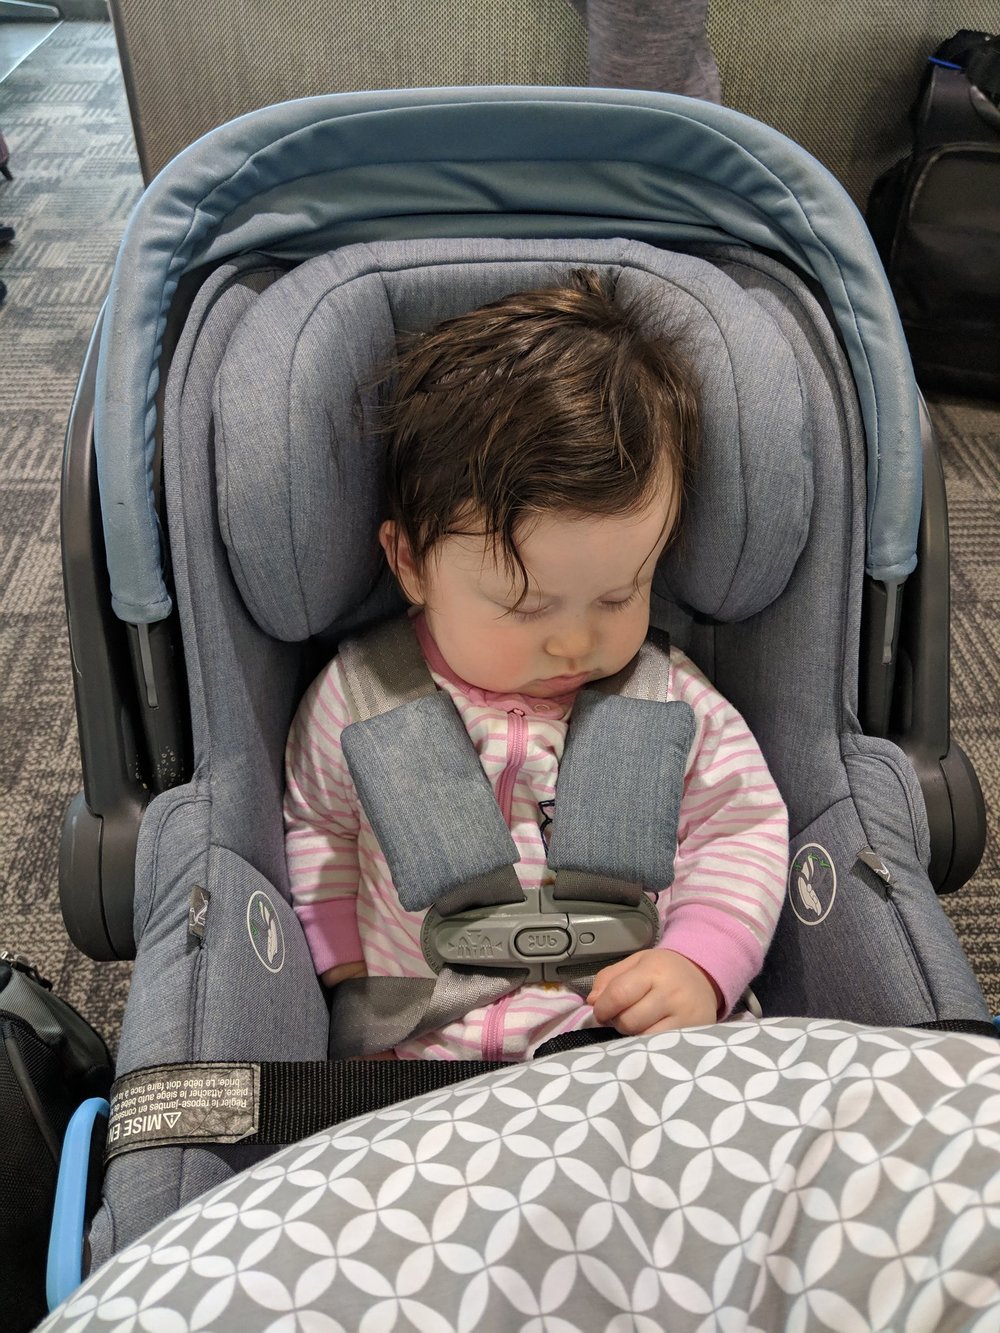 Car seat, stroller, Boppy in the walking-through-the-airport configuration.